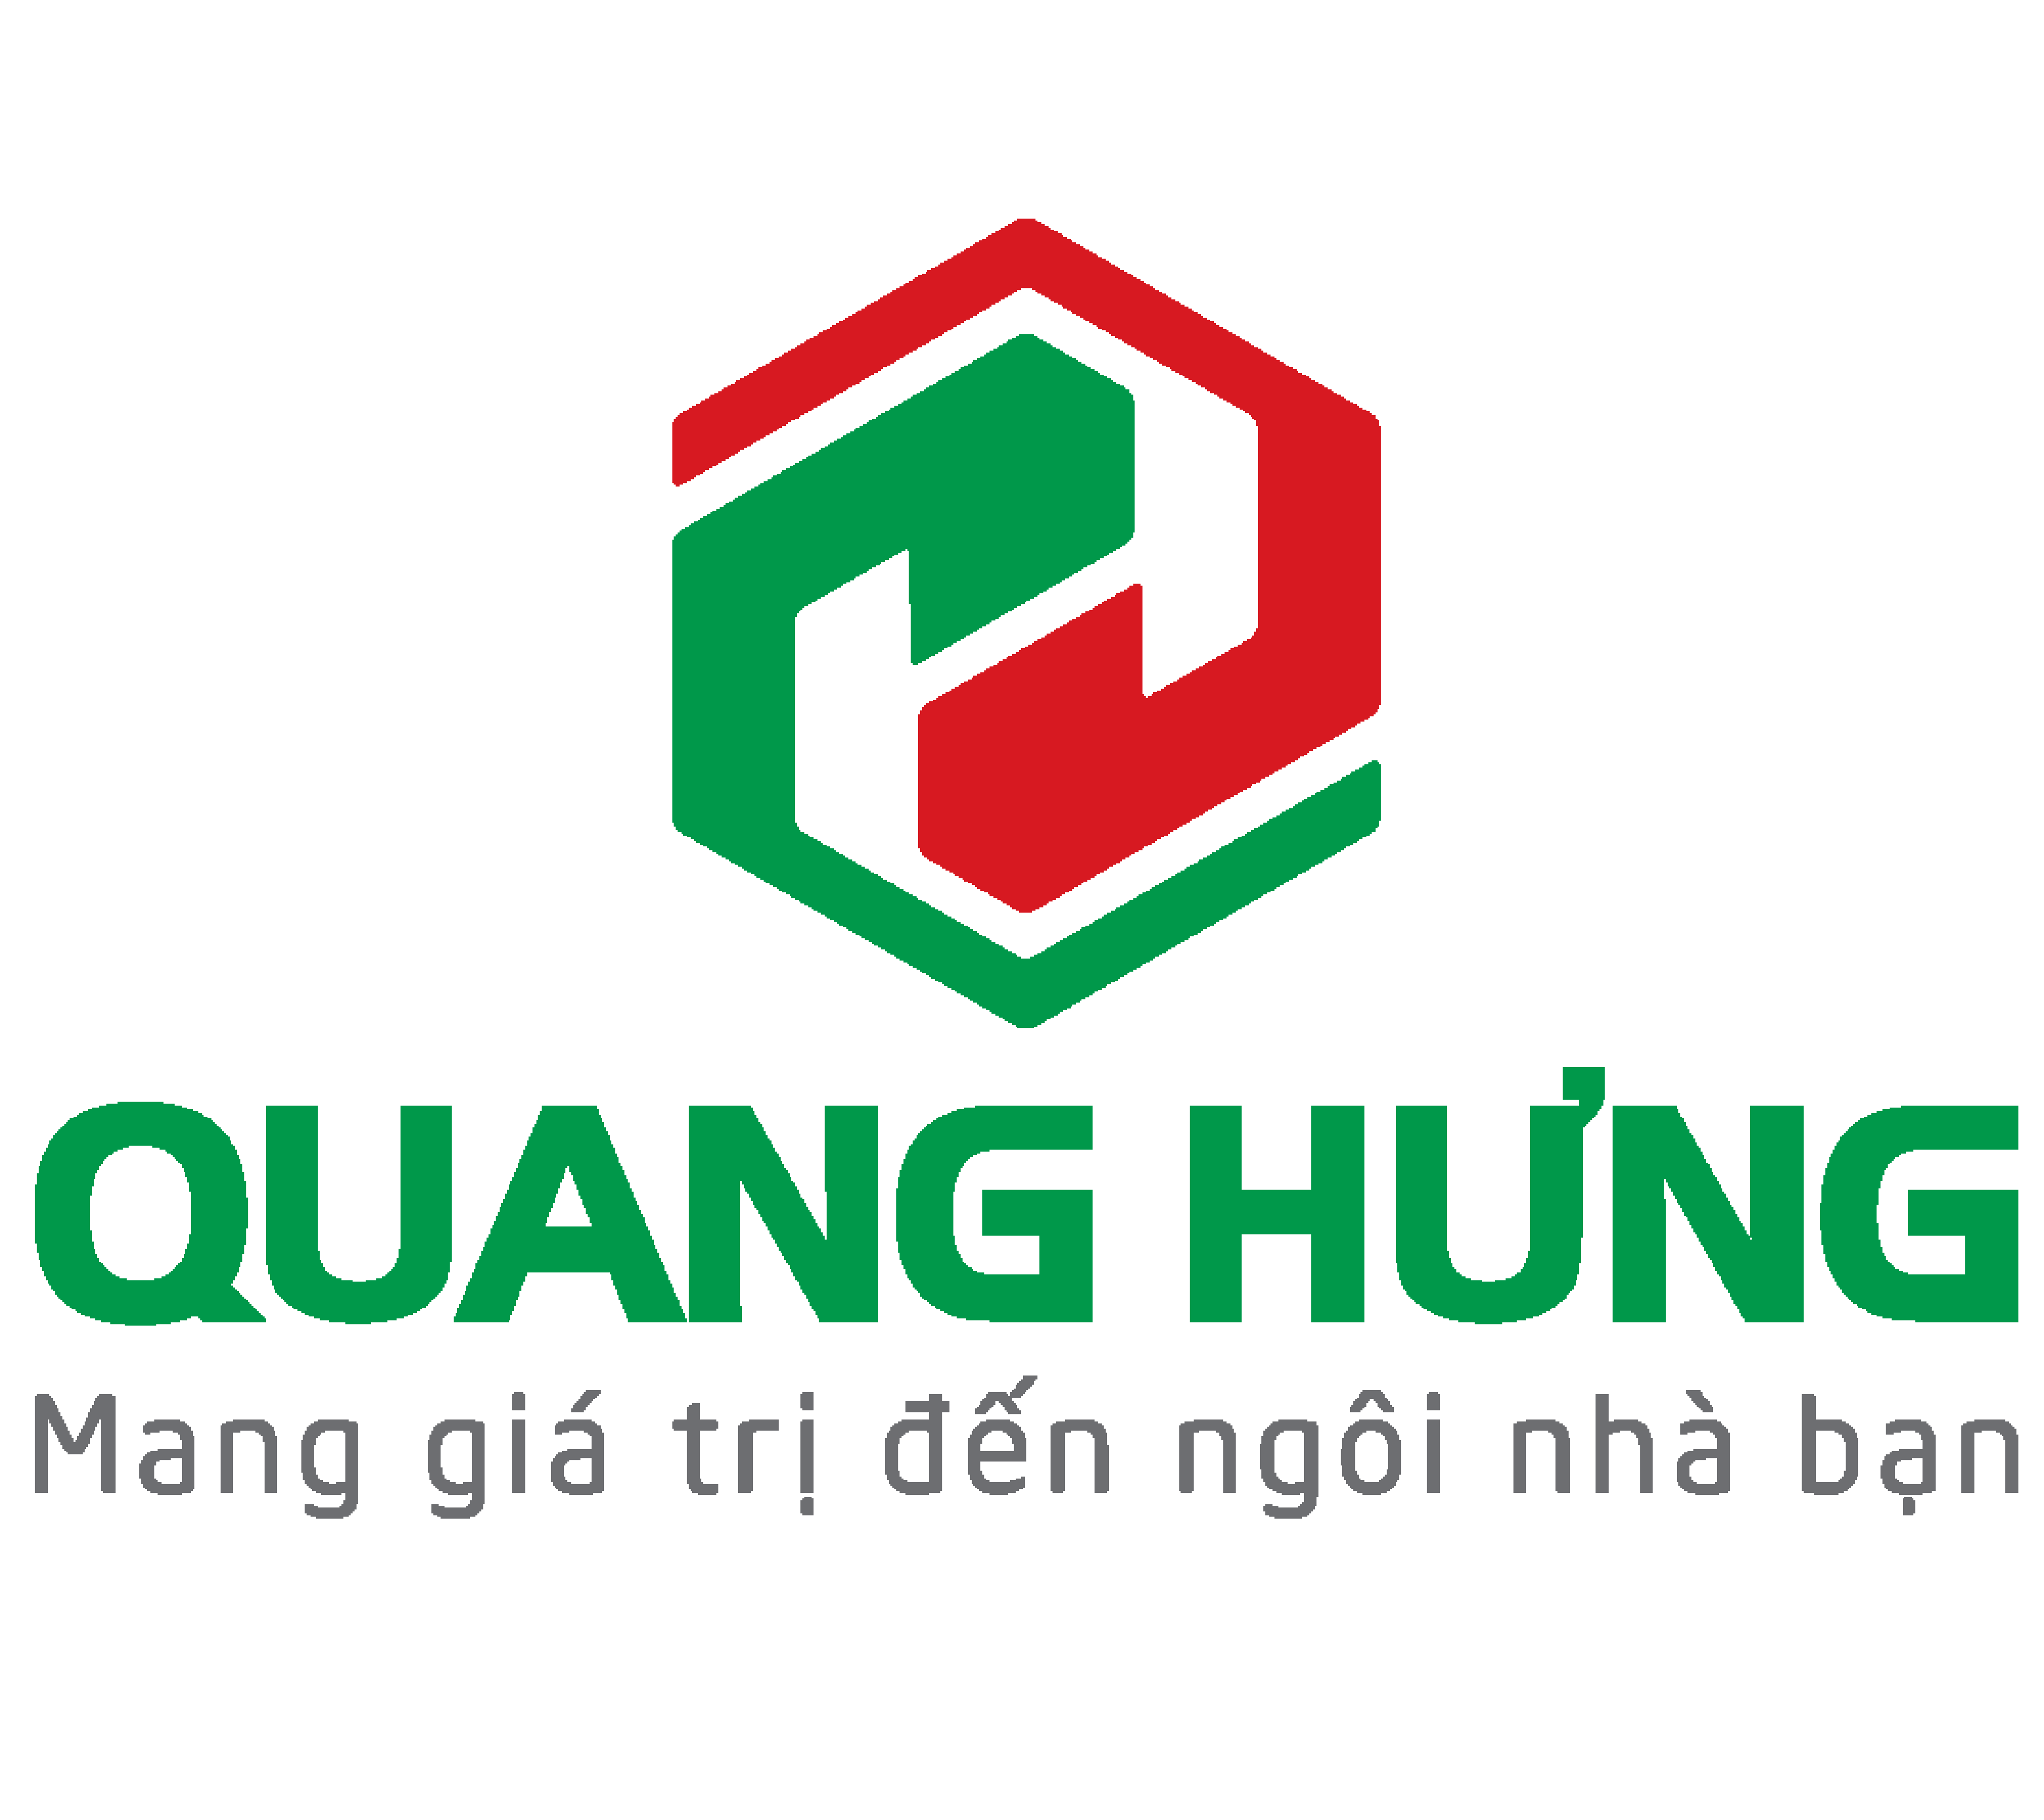 QUANG HUNG TRADING AND INTERIOR JOINT STOCK COMPANY